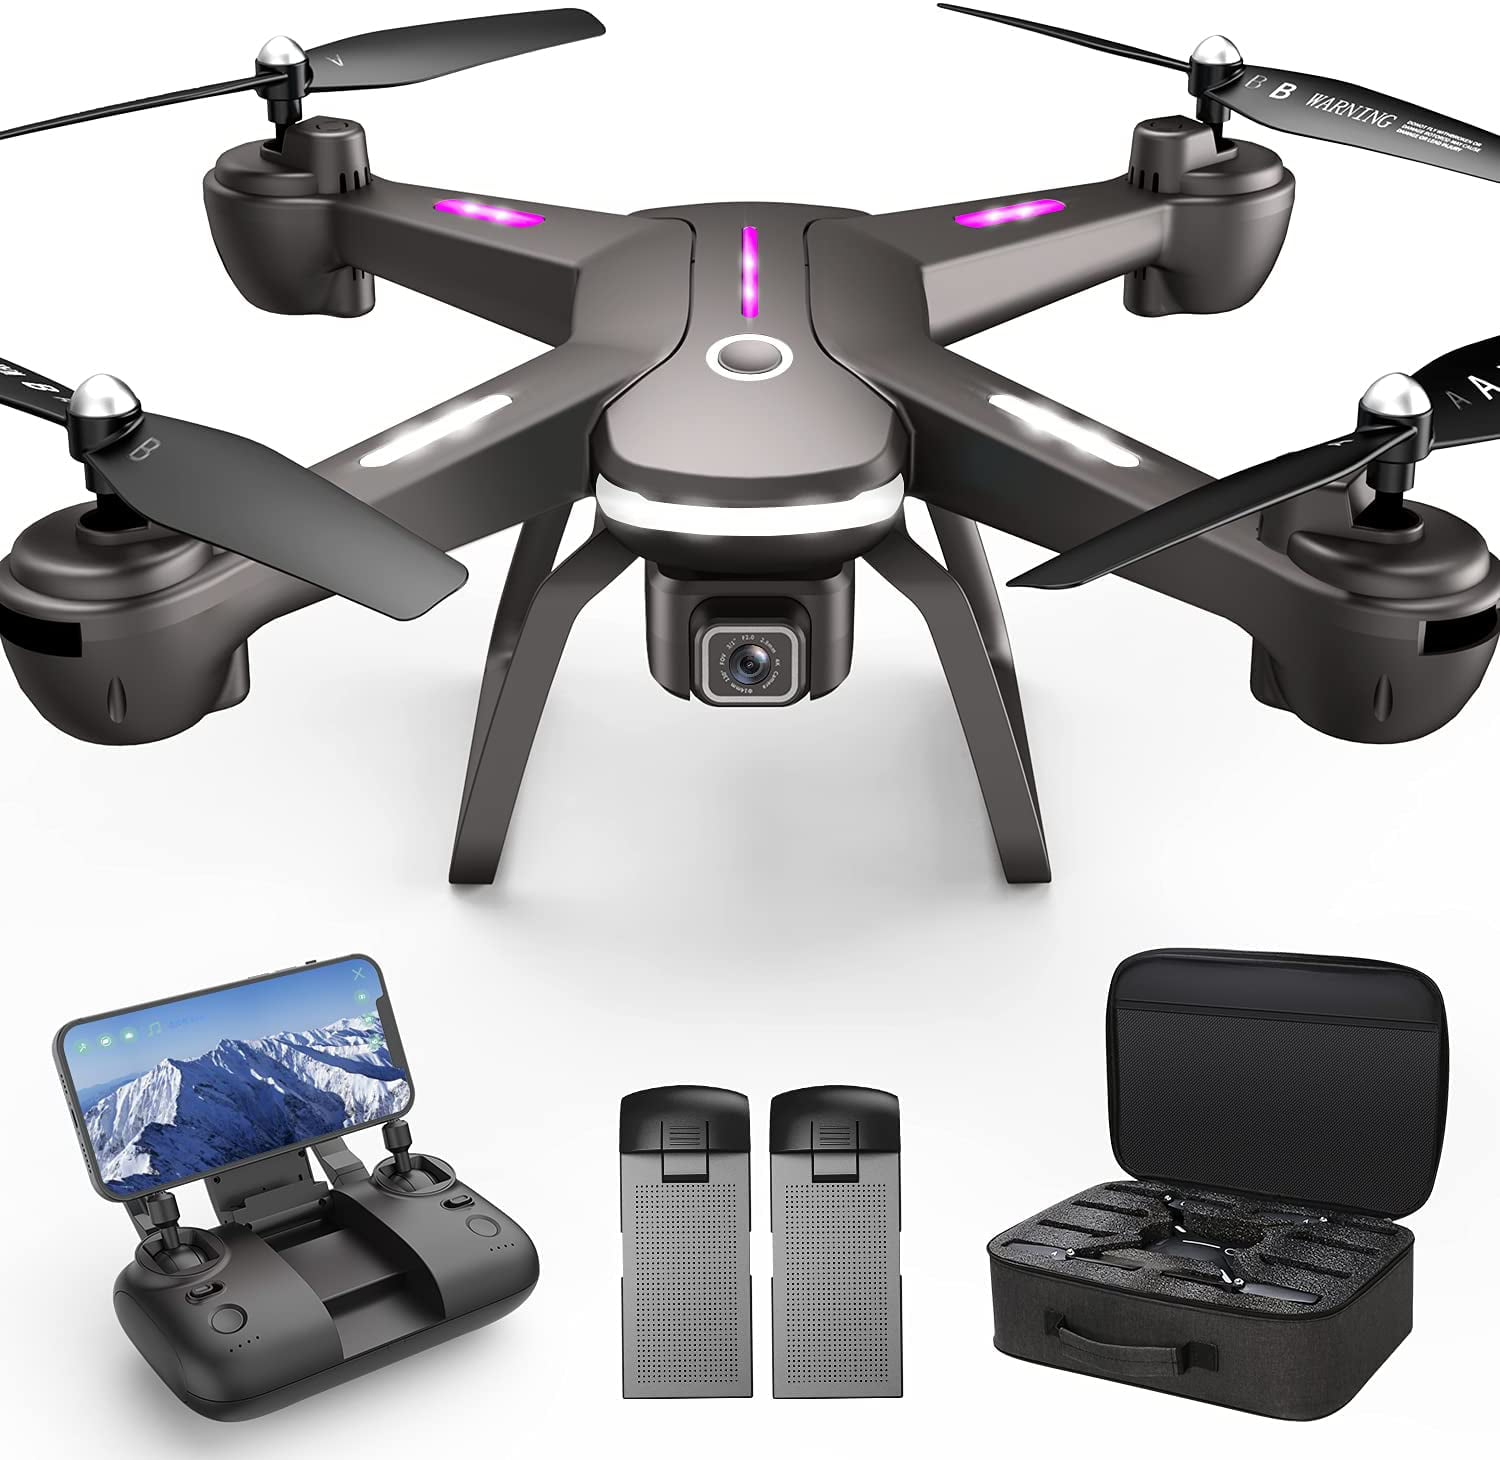 GPS Drone with 4K Camera for Adults, Black Dual Camera 5G Wifi FPV Live Video Drone ,40mins Flight Time